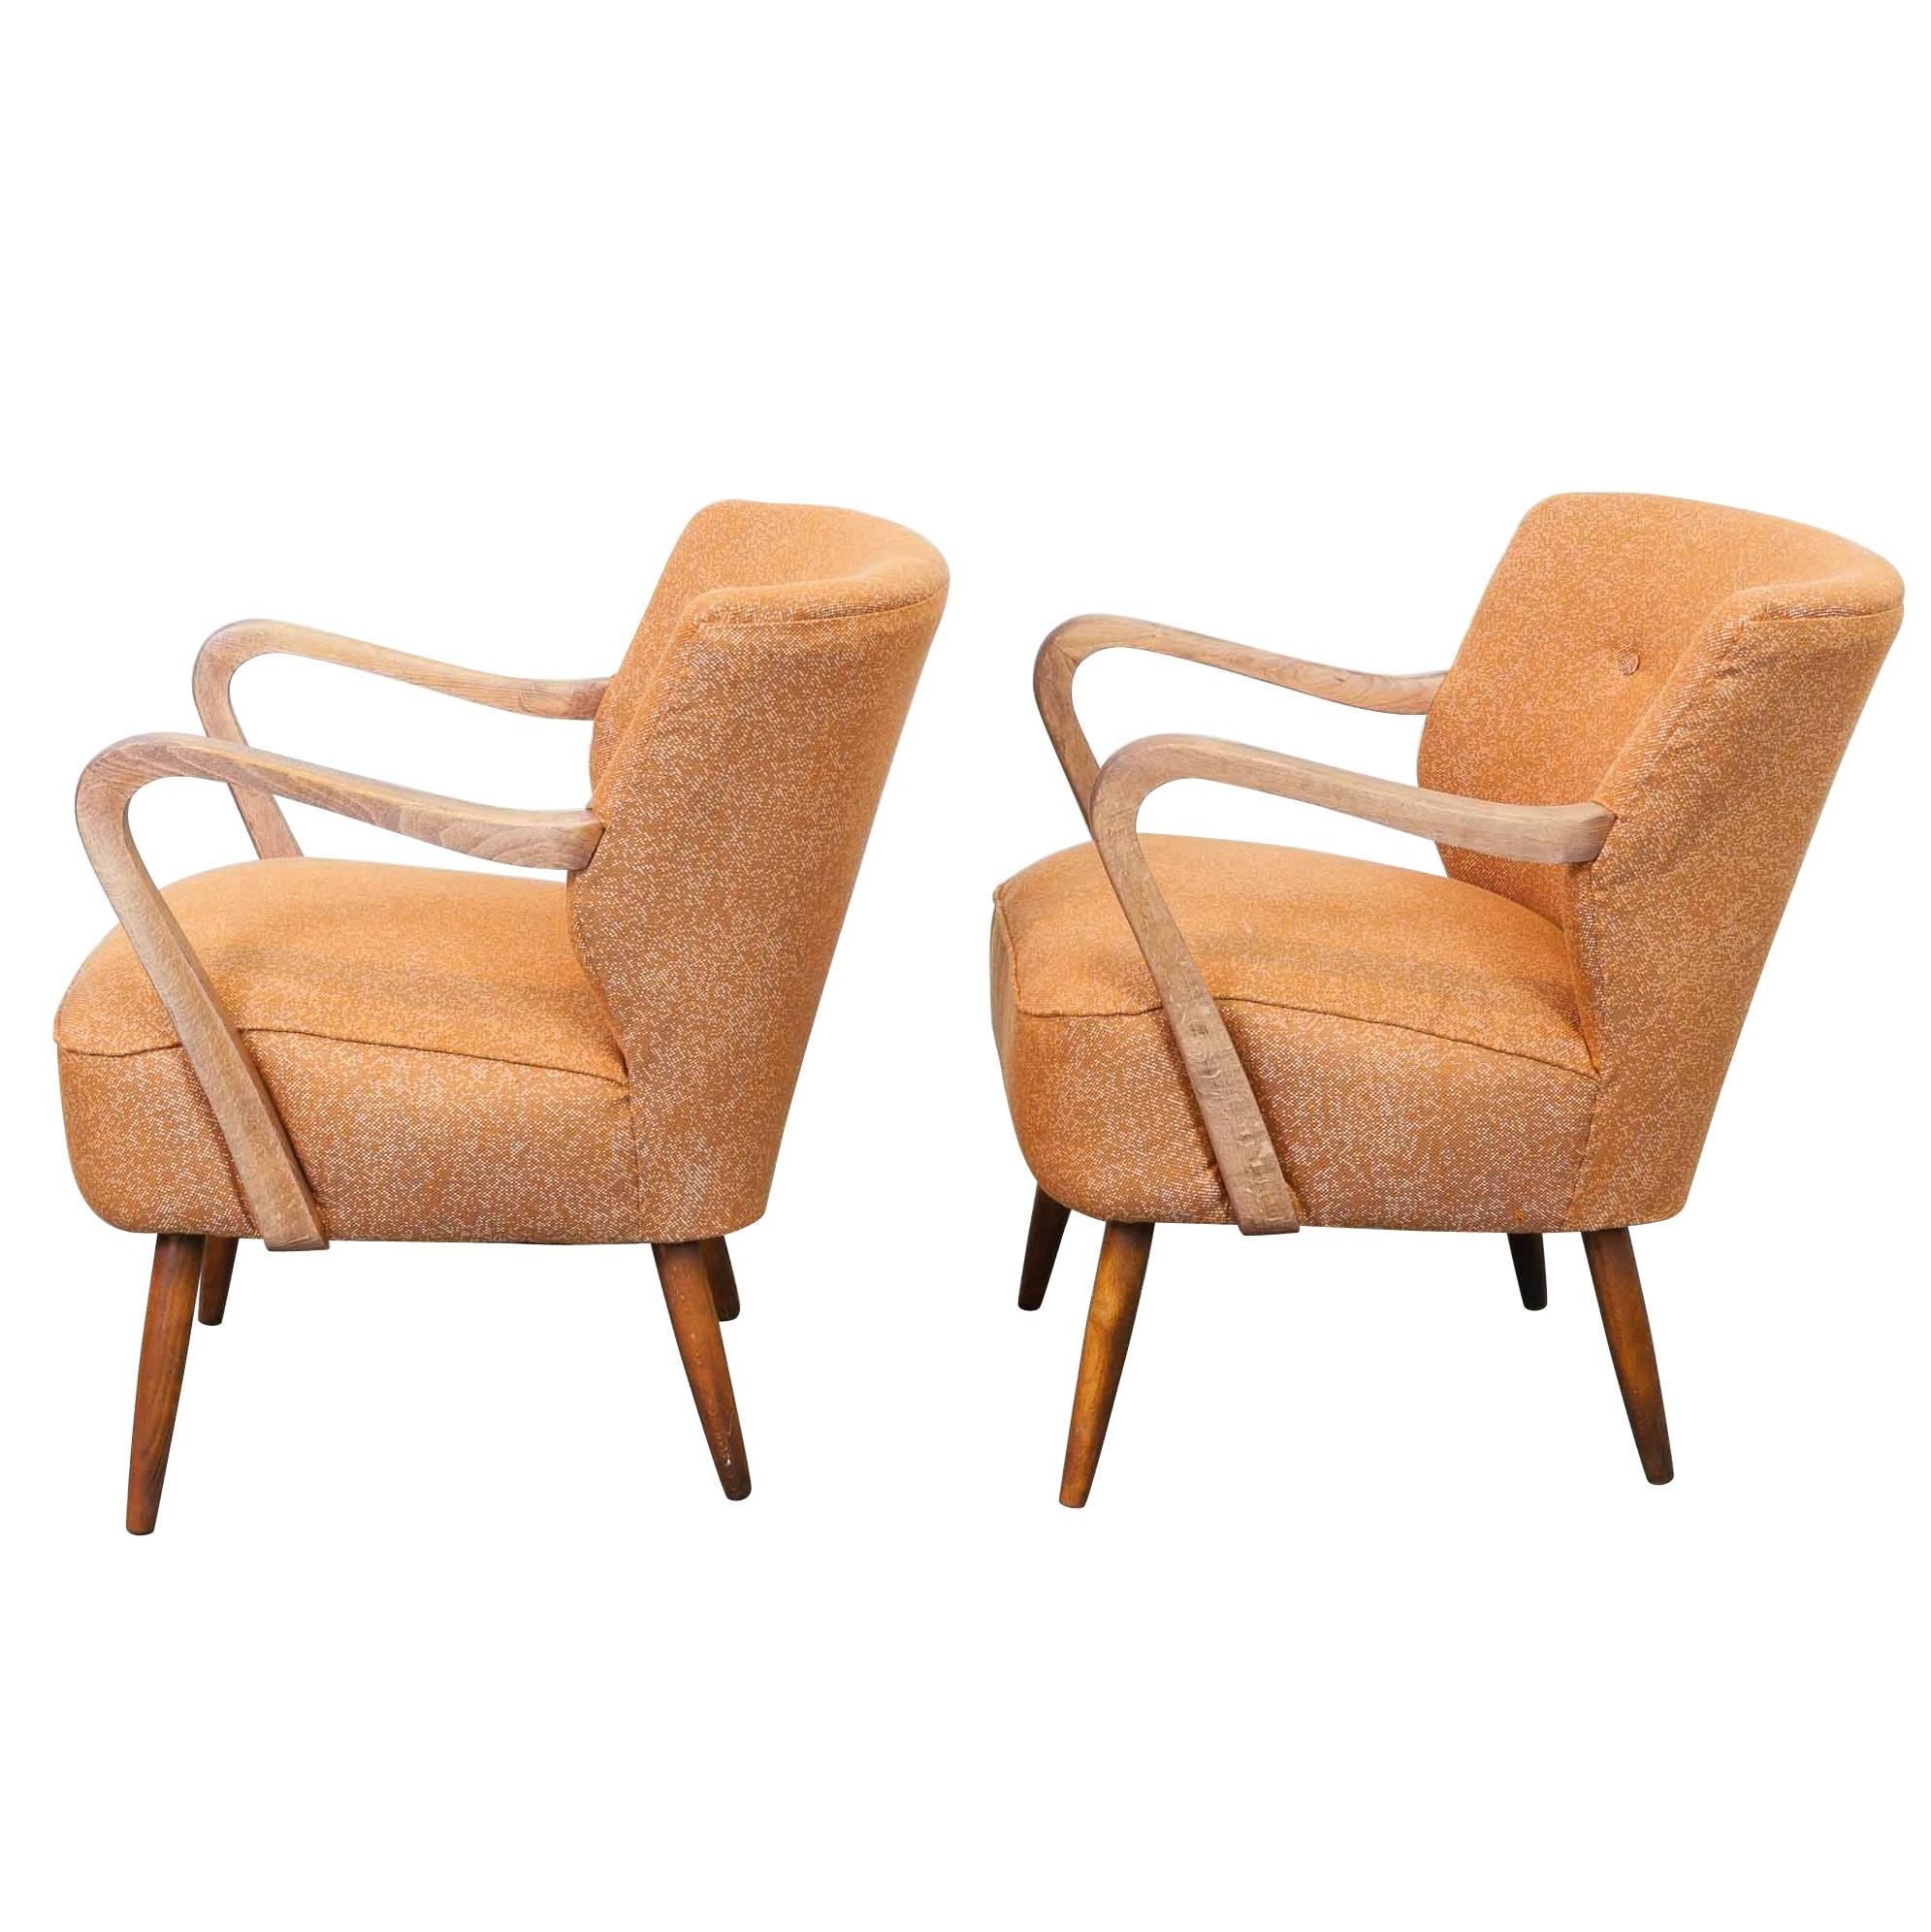 Pair of 1940s Vintage Midcentury Cocktail Chairs in Astro Orange Fabric